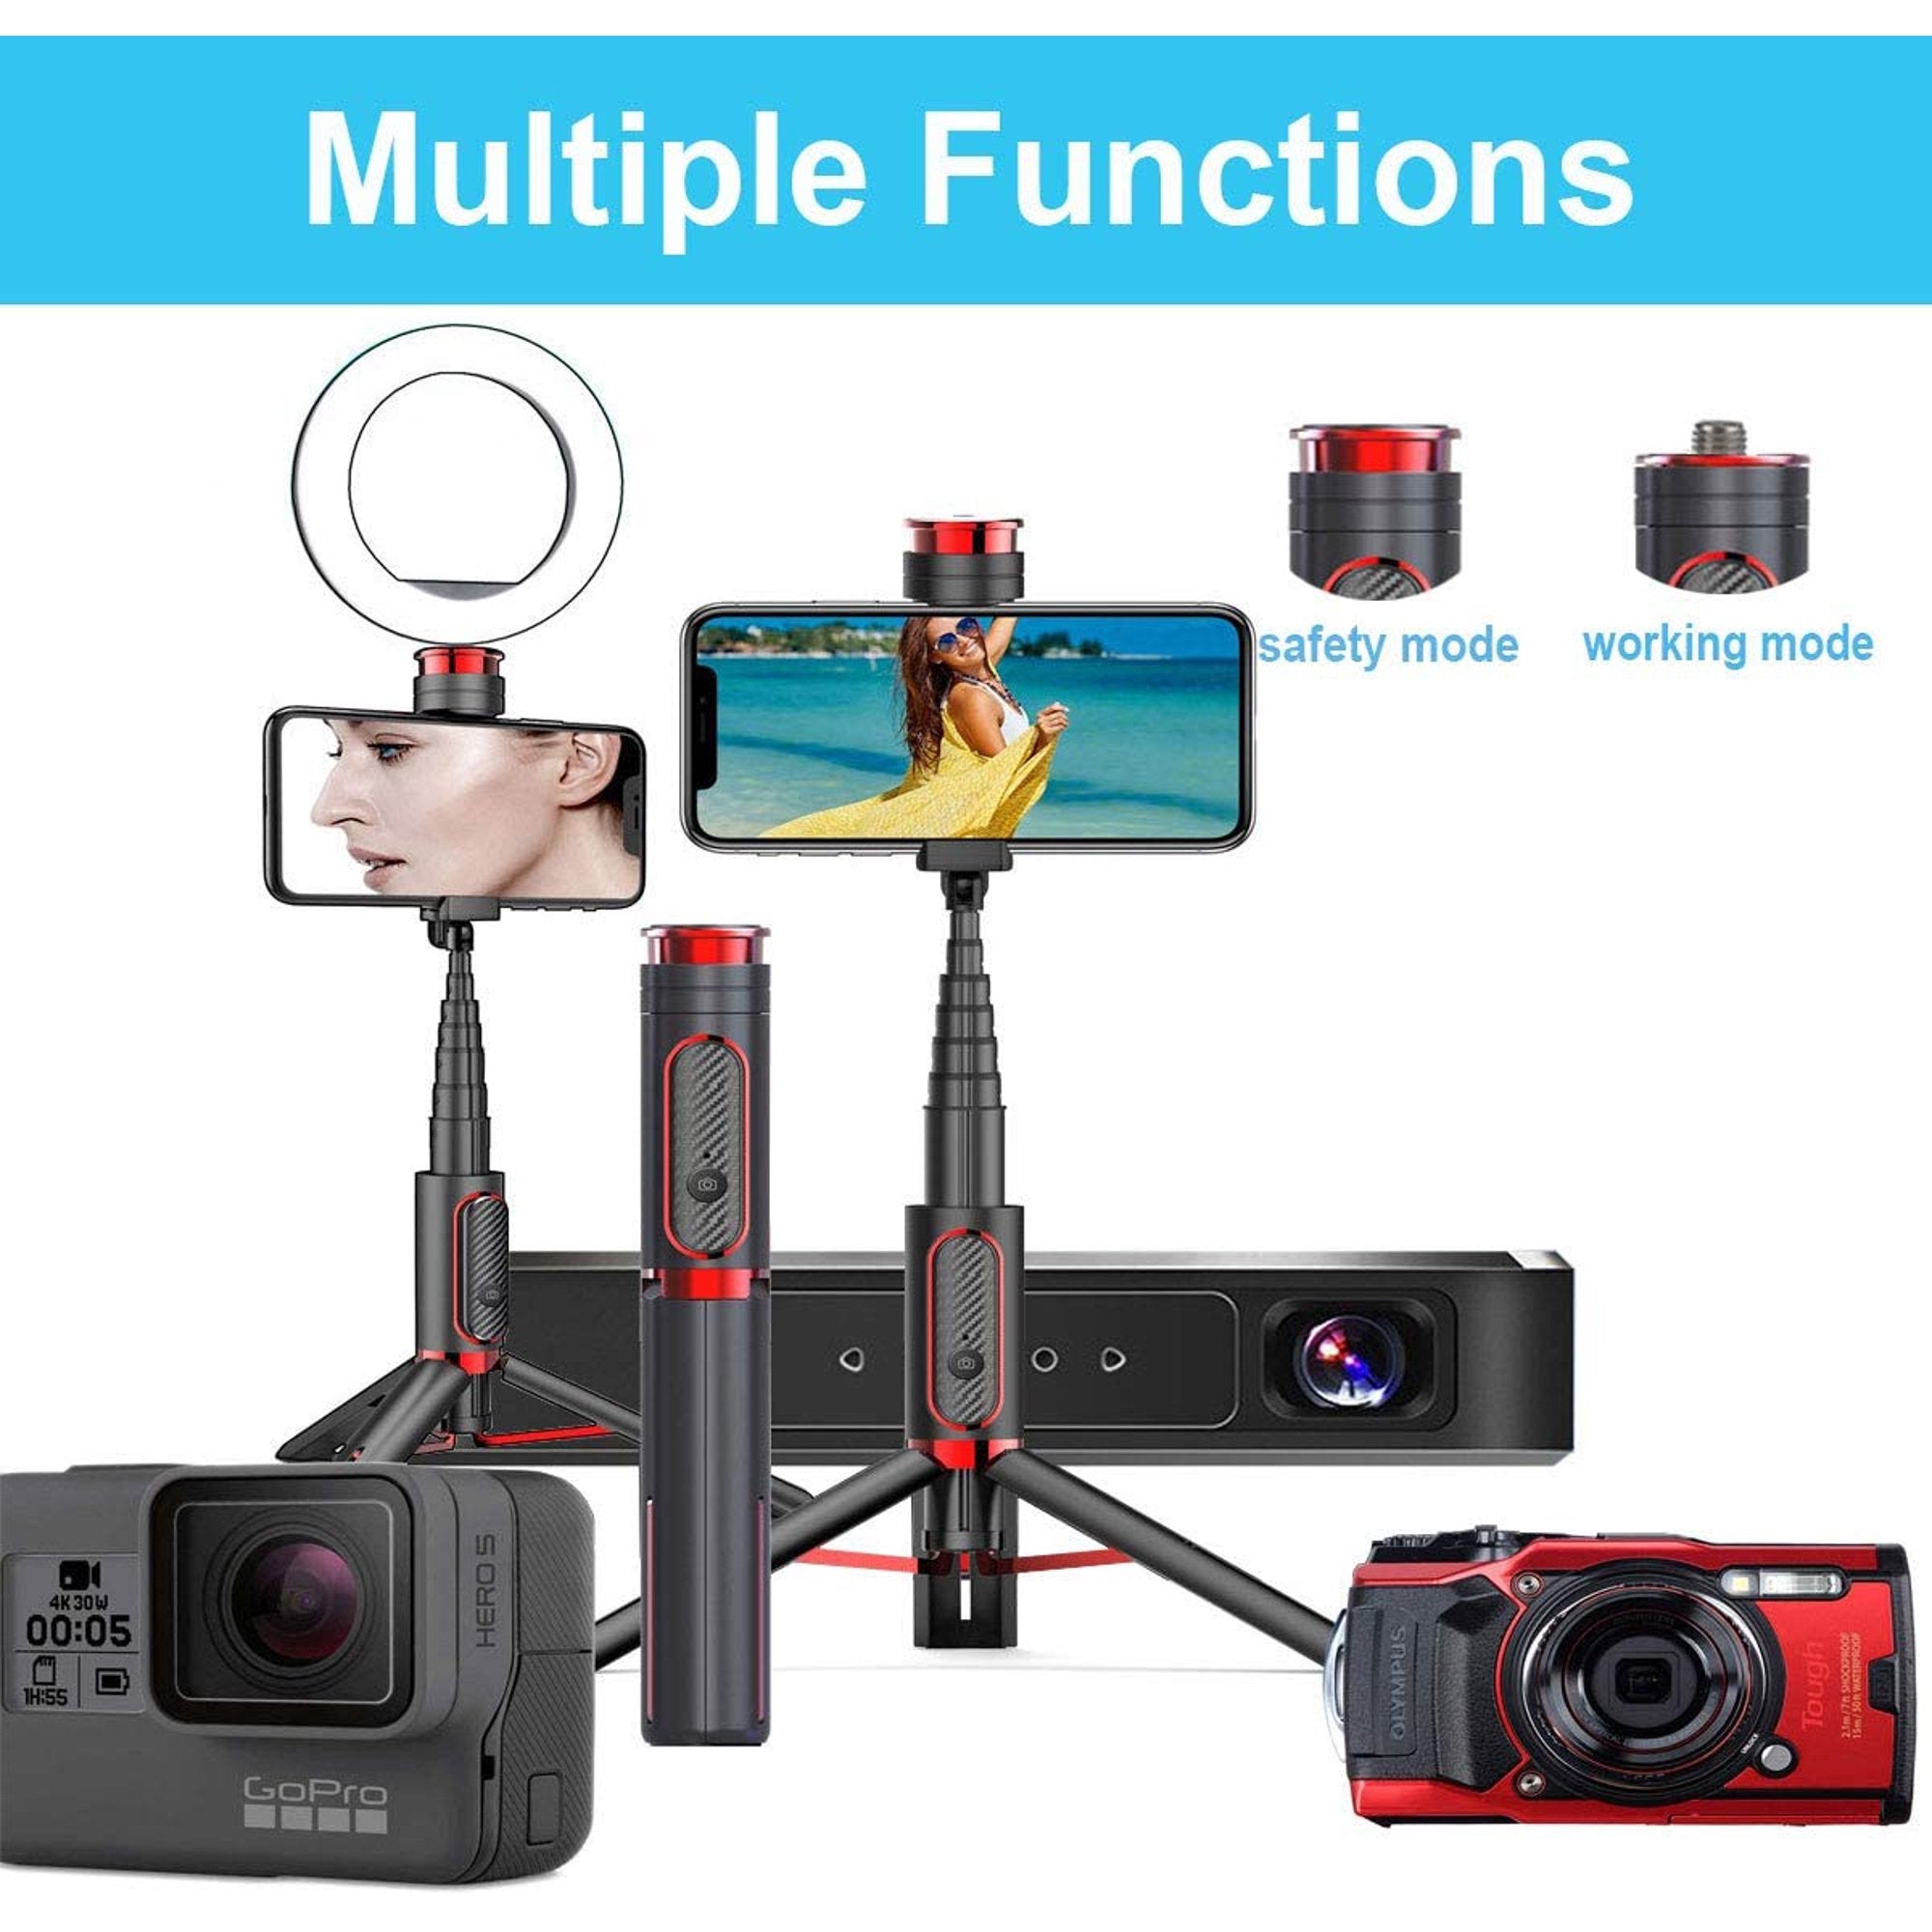 Selfie Stick Tripod, All in One Extendable Tripod Stand with Detachable Bluetooth Remote, Lightweight Aluminum Selfie Stick for iPhone 11/XS MAX/X/8/8 Plus, Galaxy S10/S9/S9 Plus, Huawei and More